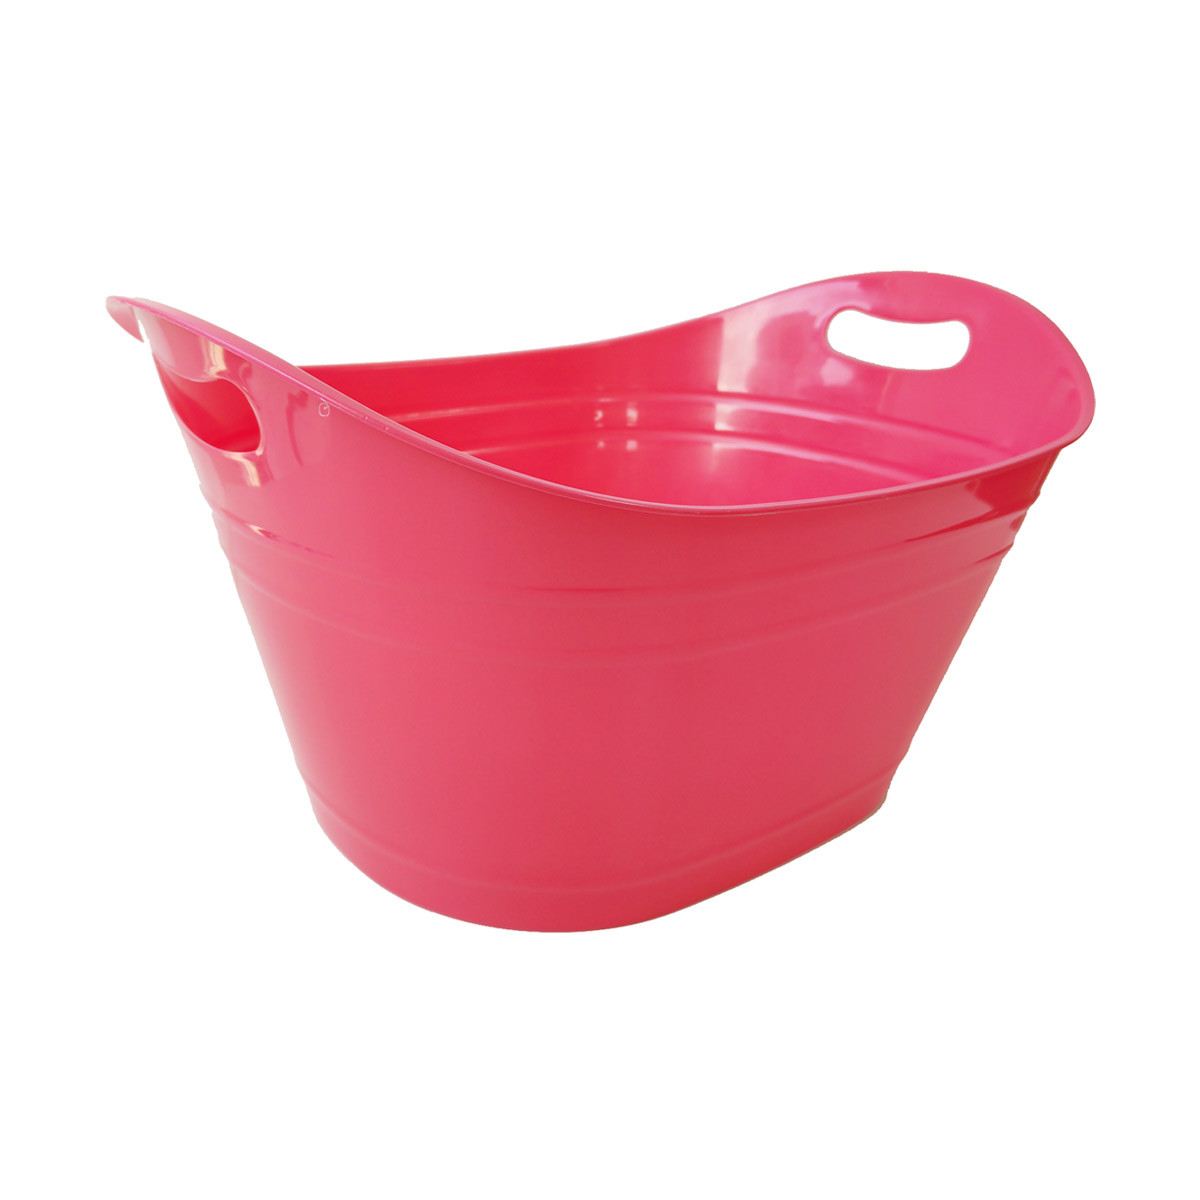 Oval Plastic Party Tub with Handle, Extra Large